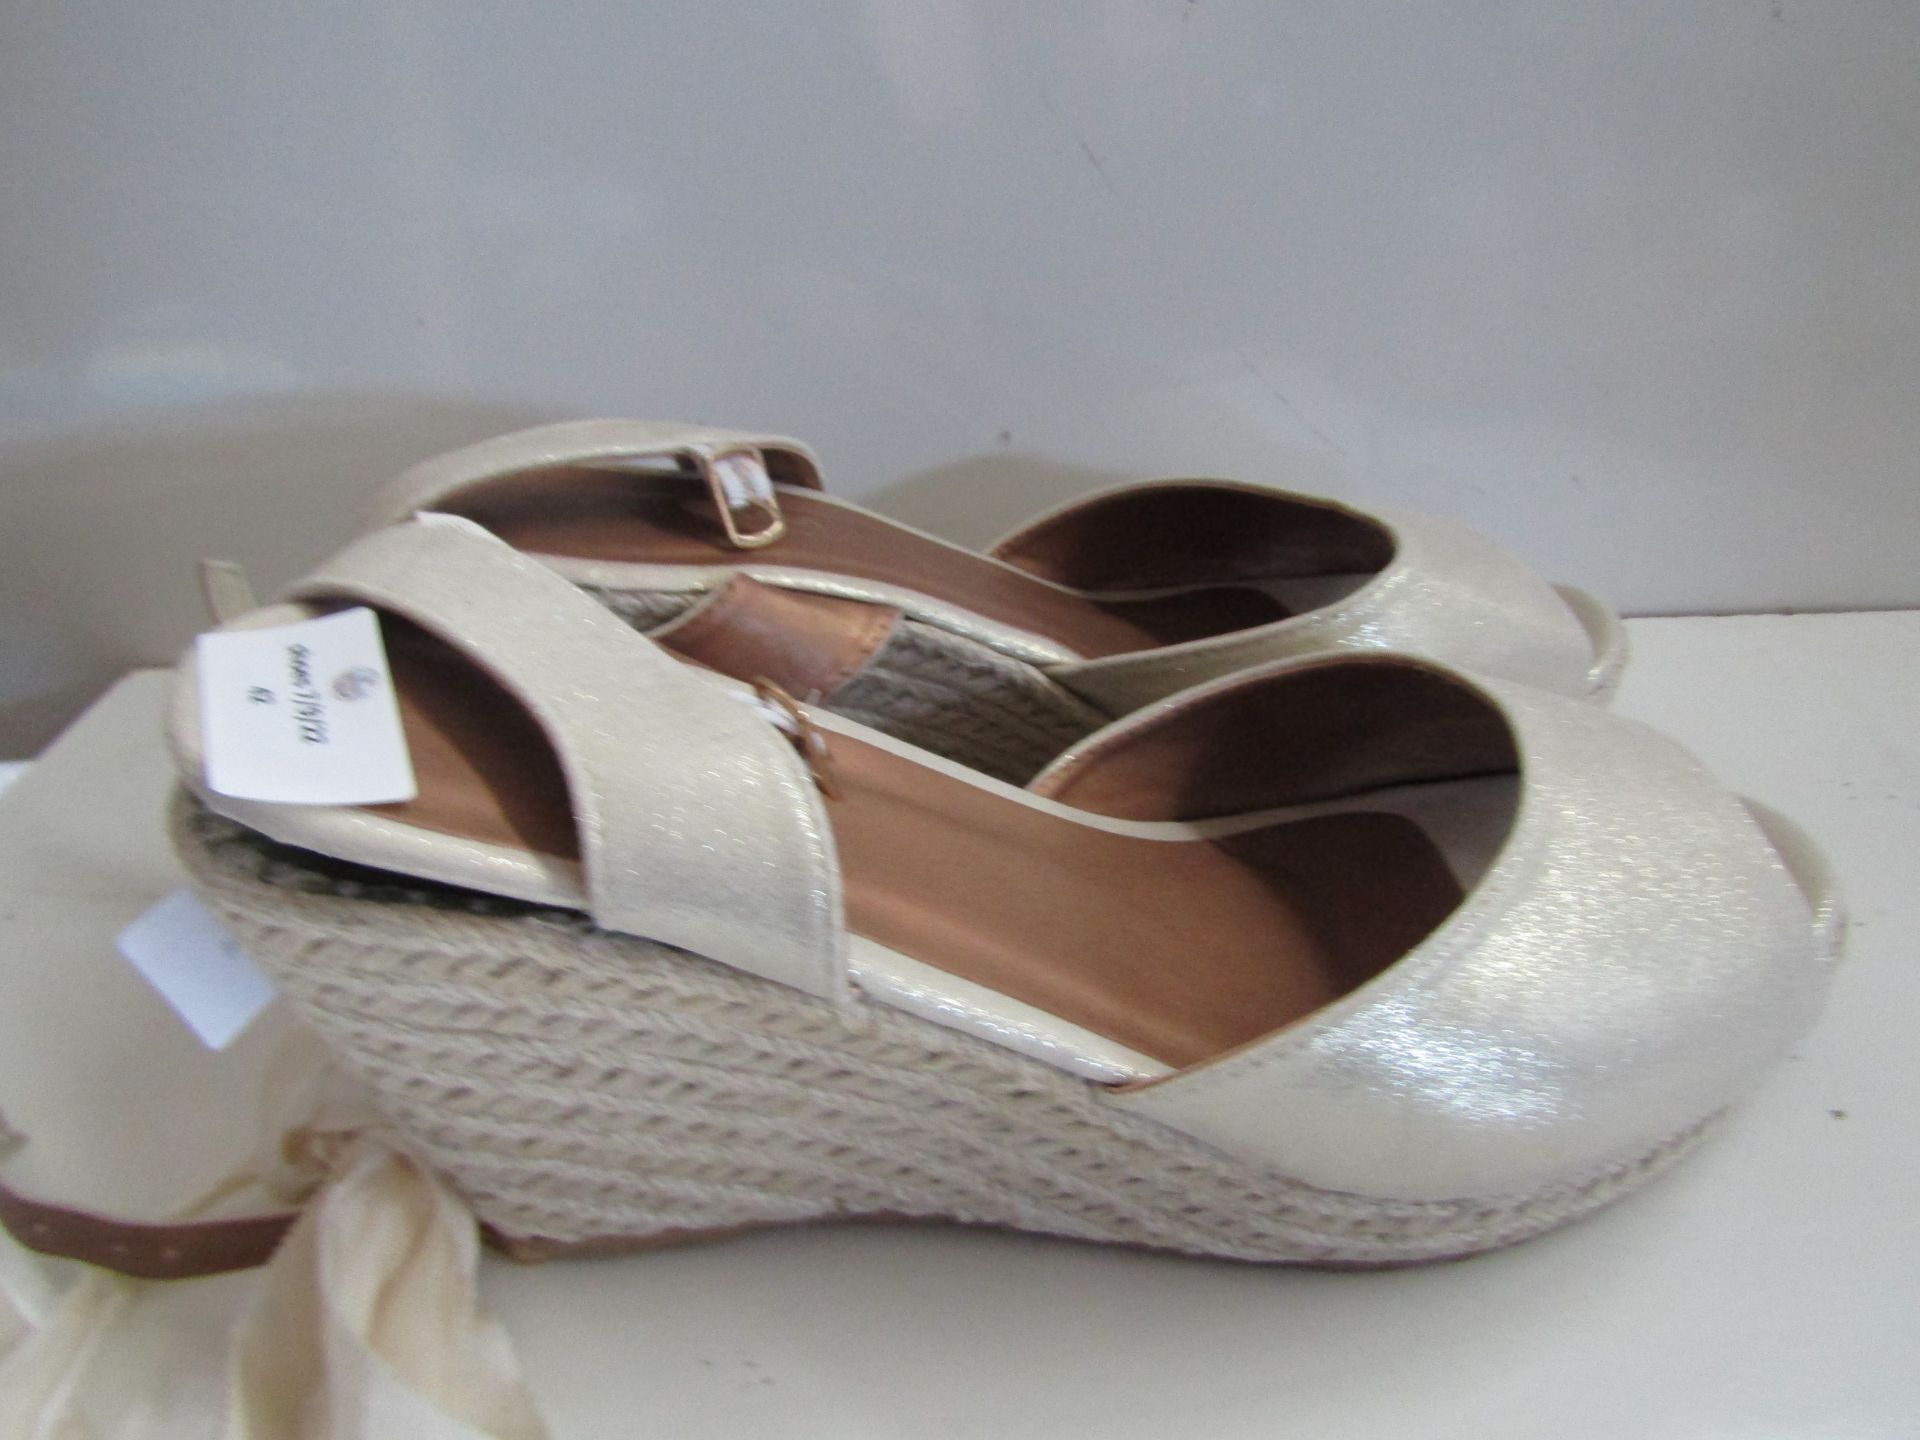 Lascana Wedged Shoe Beige Size 42 ( These Have Been Worn Need a Small Repair To Right Sole )